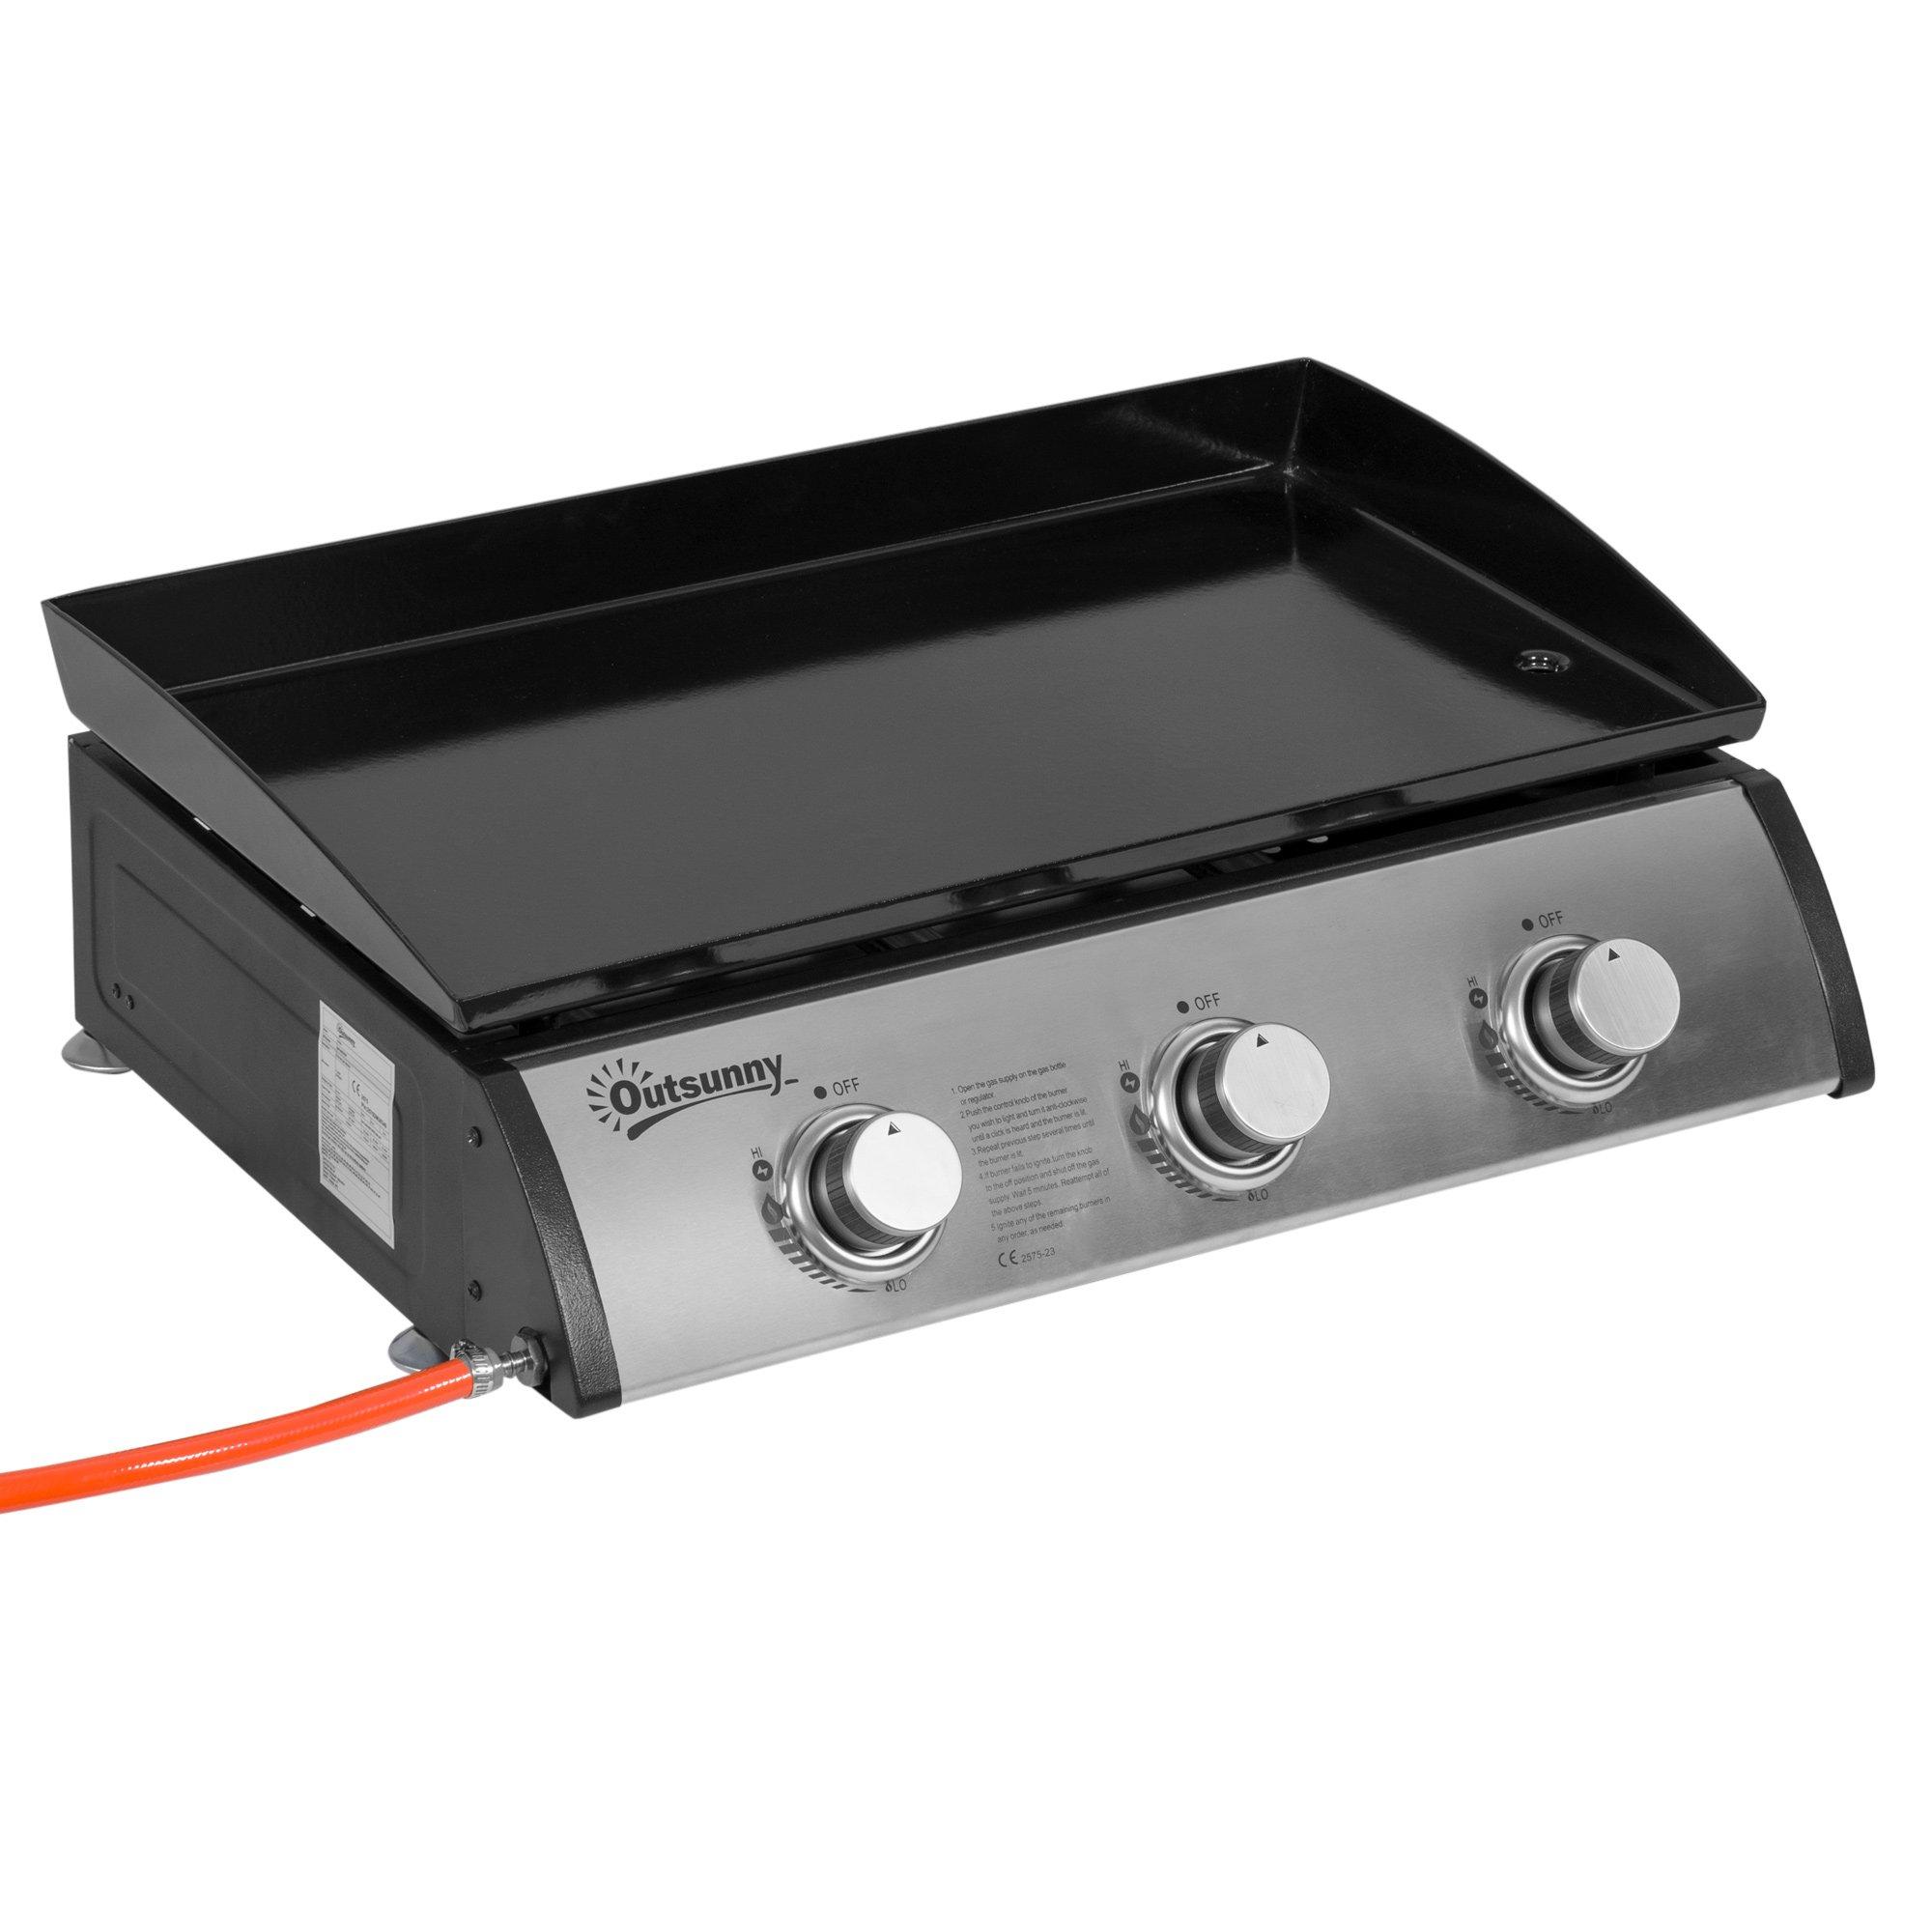 Portable Gas Plancha BBQ Grill with 3 Stainless Steel Burner, 9kW